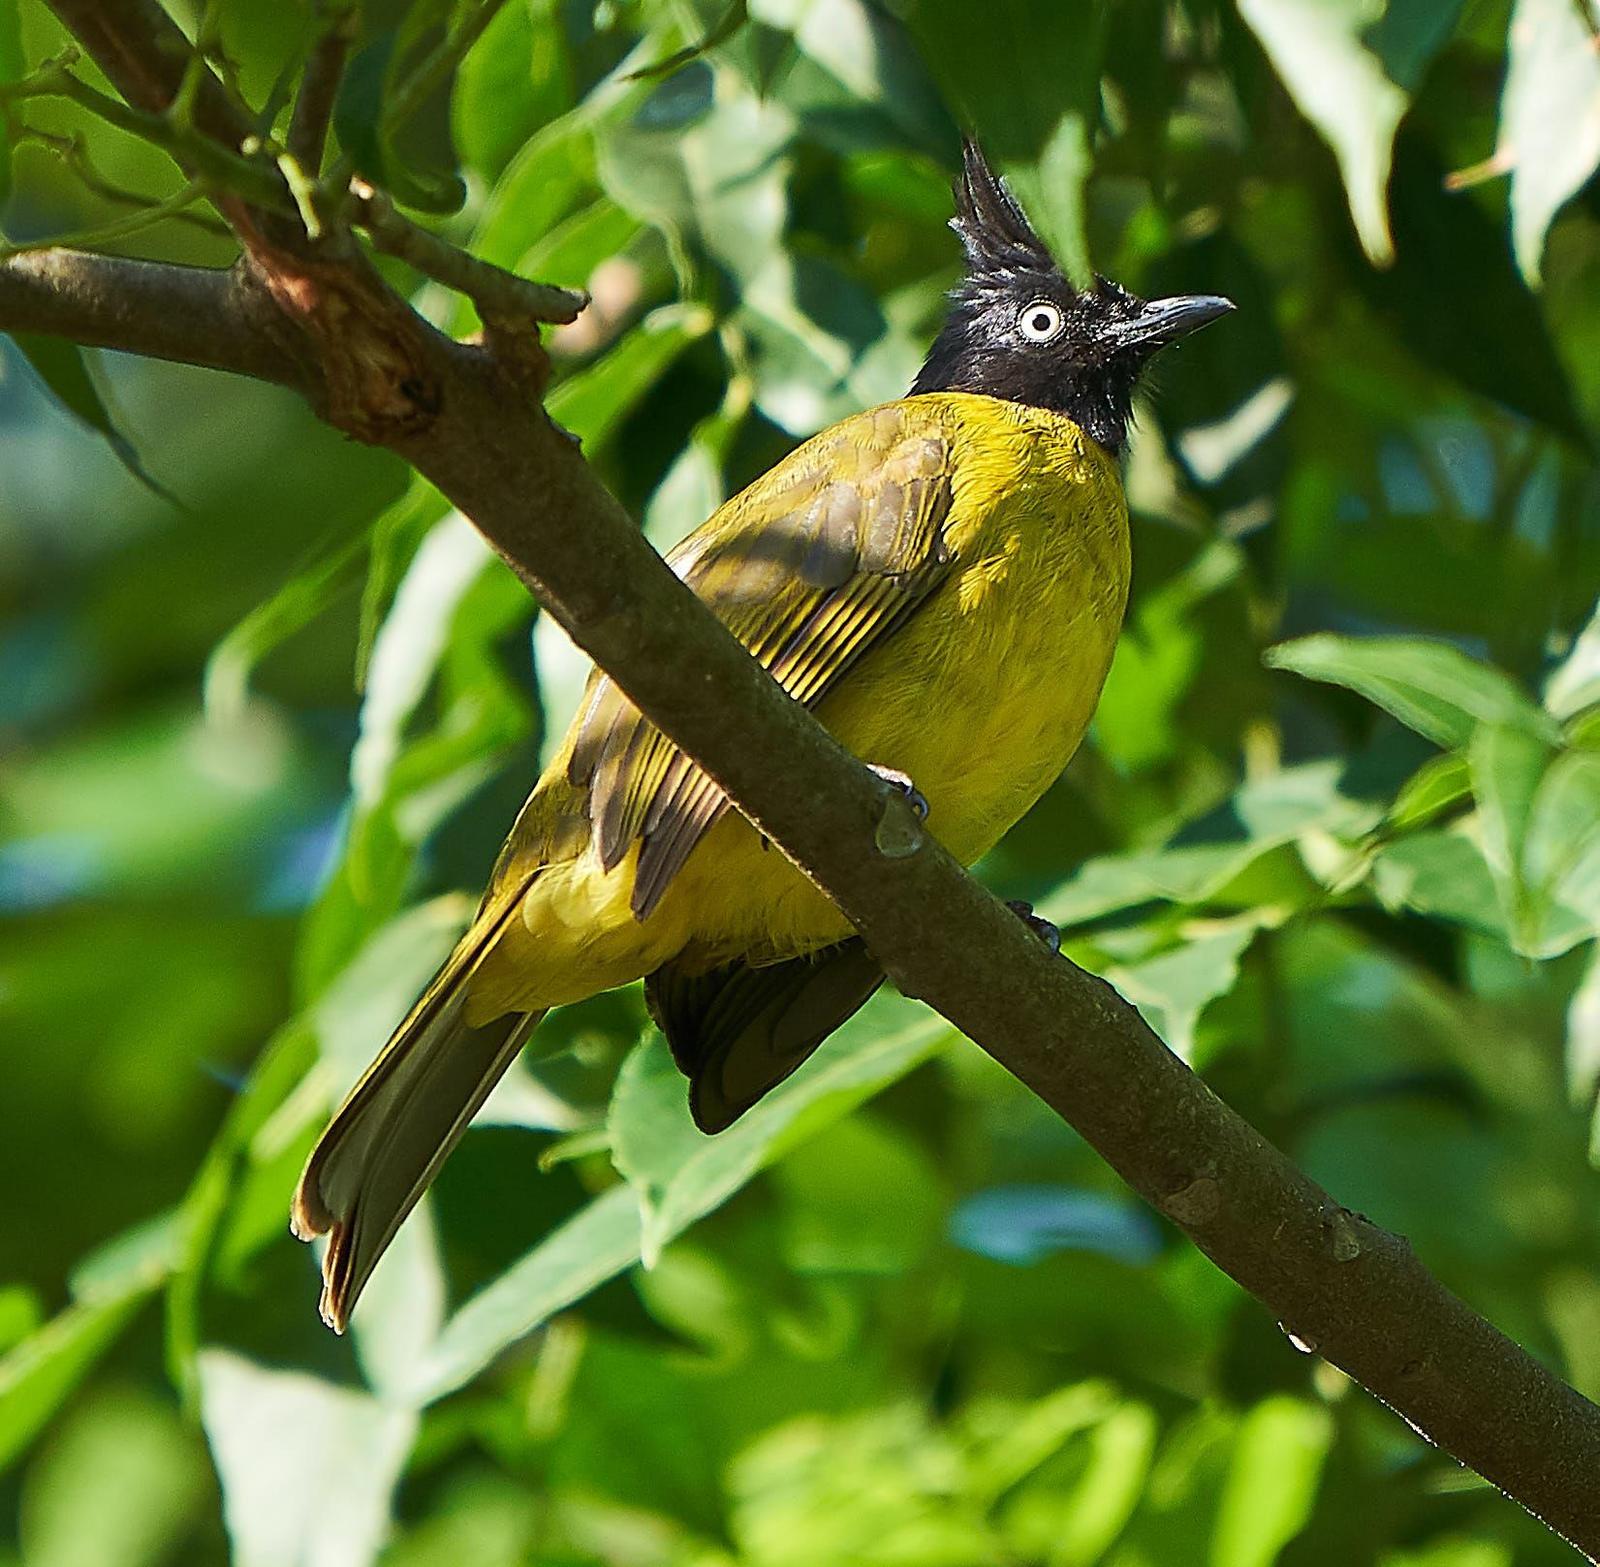 Black-crested Bulbul Photo by Steven Cheong